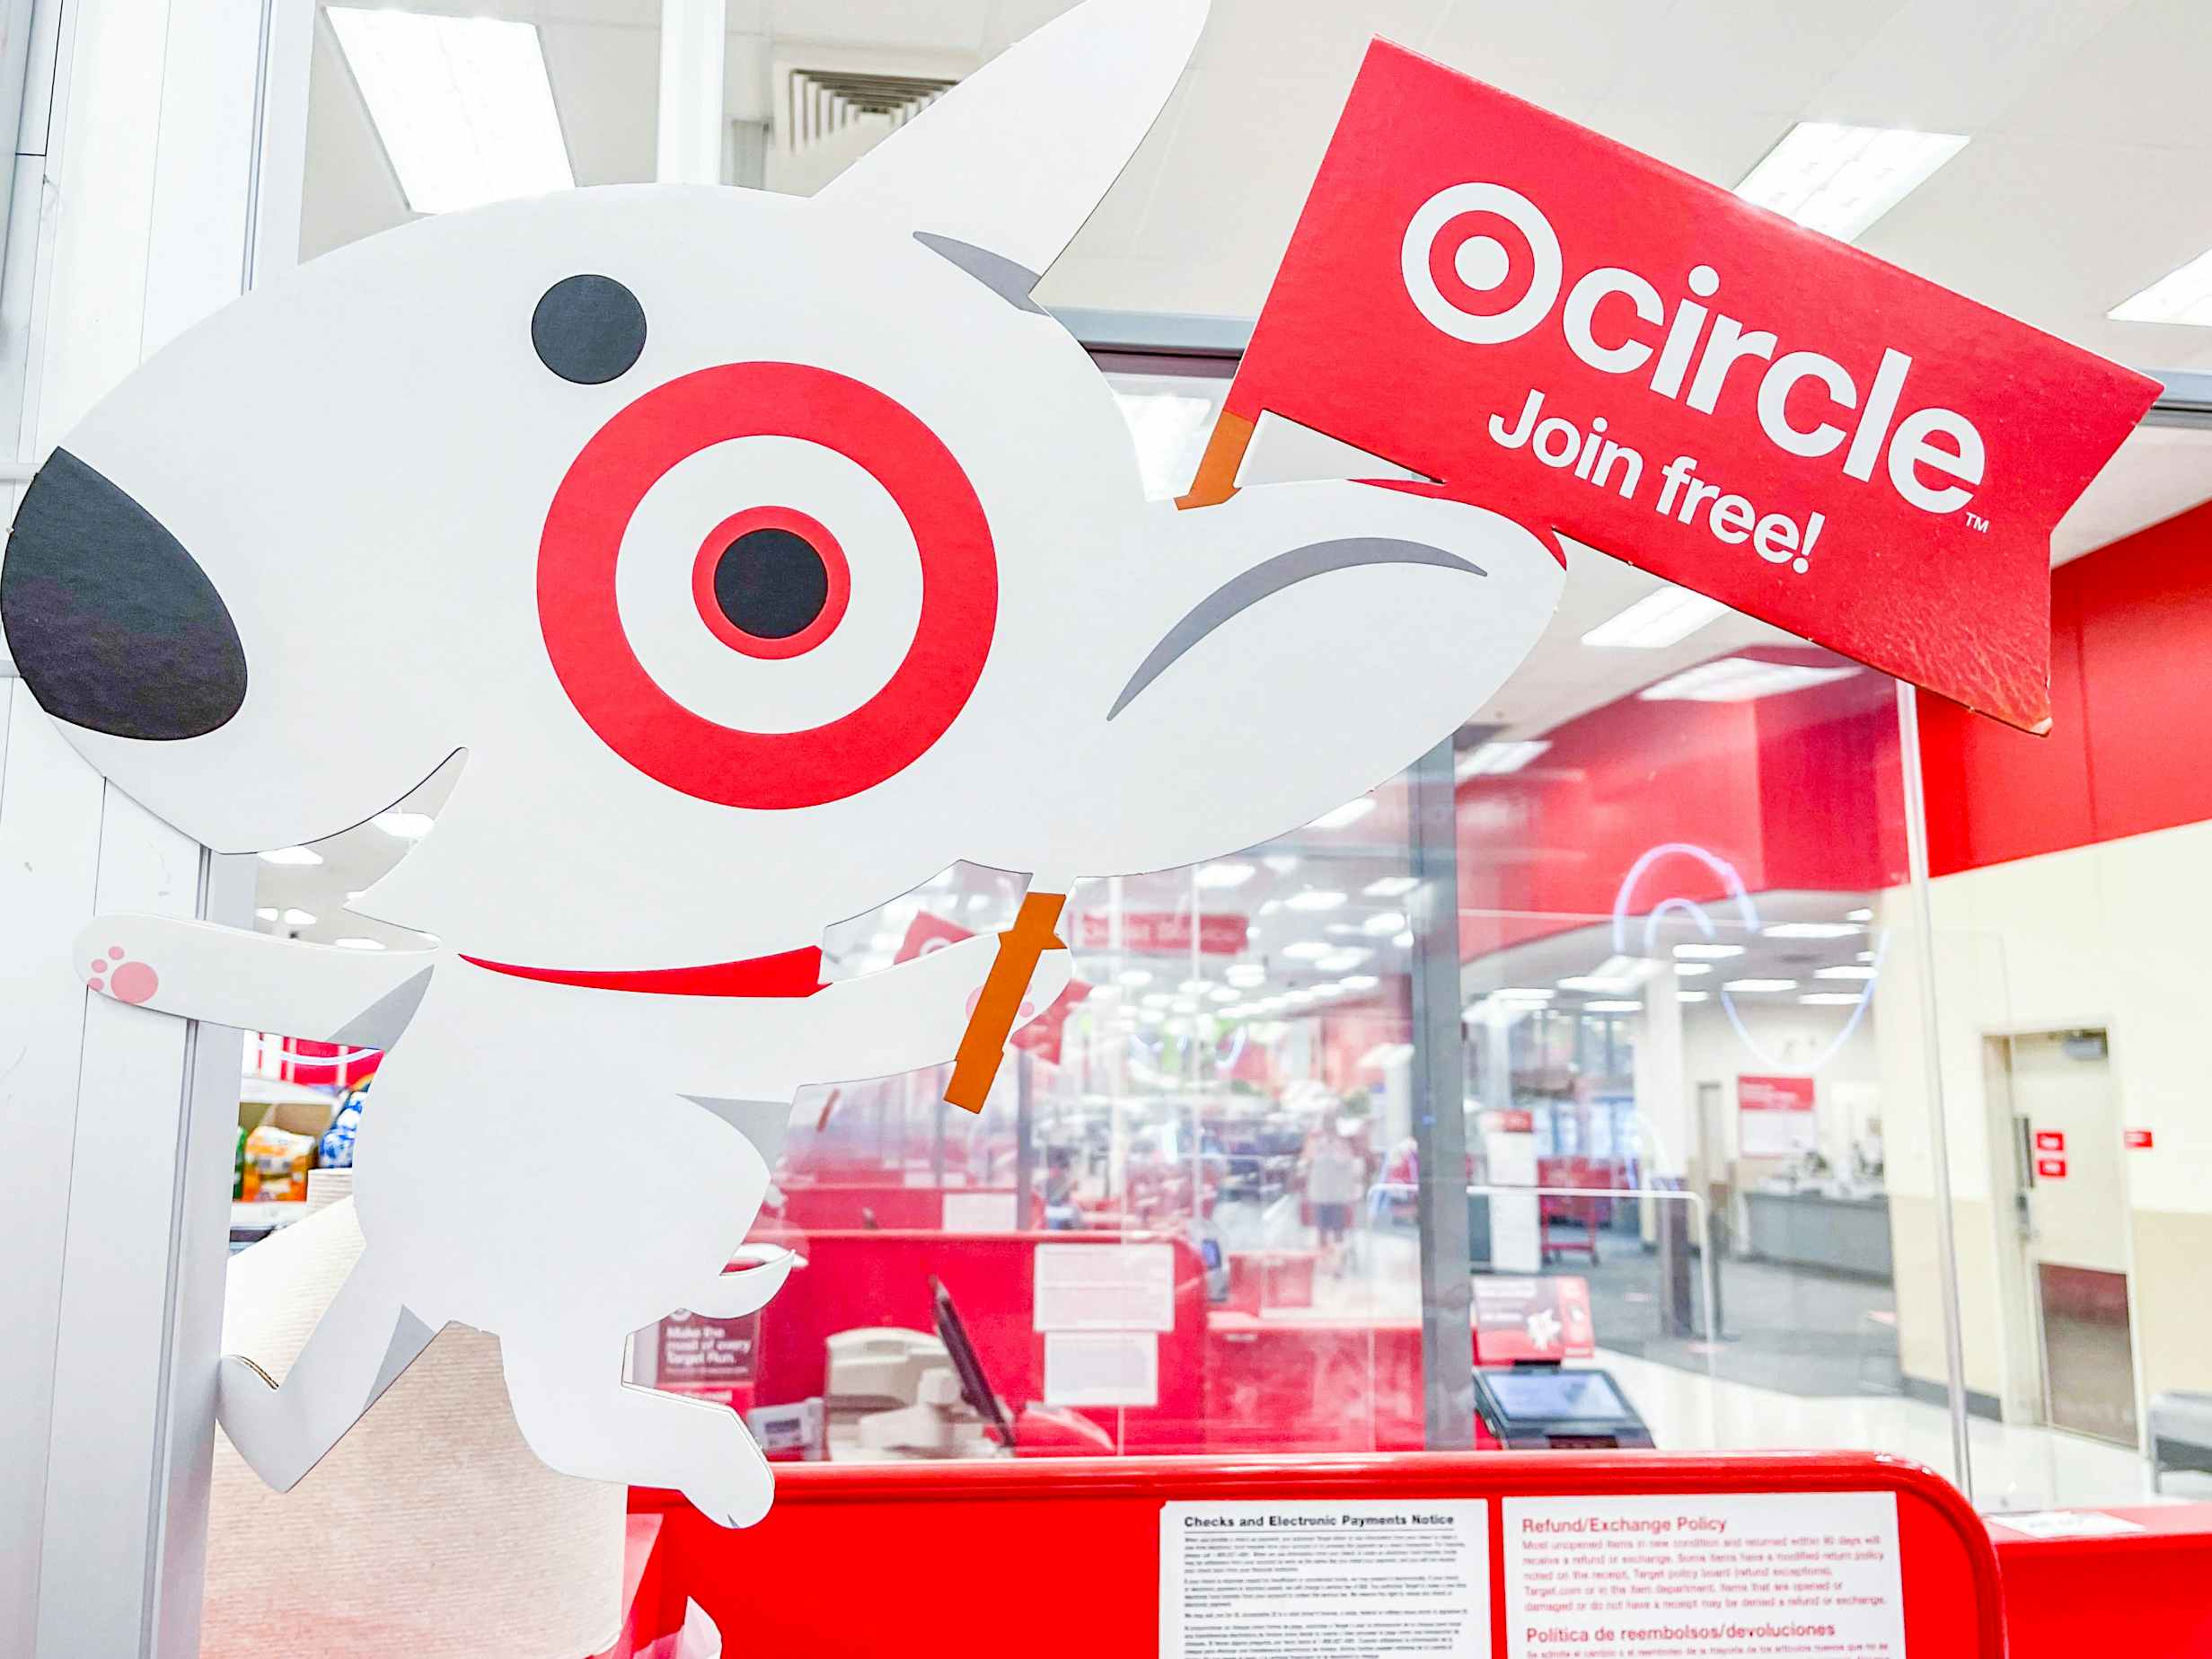 join now circle sign with target bullseye dog